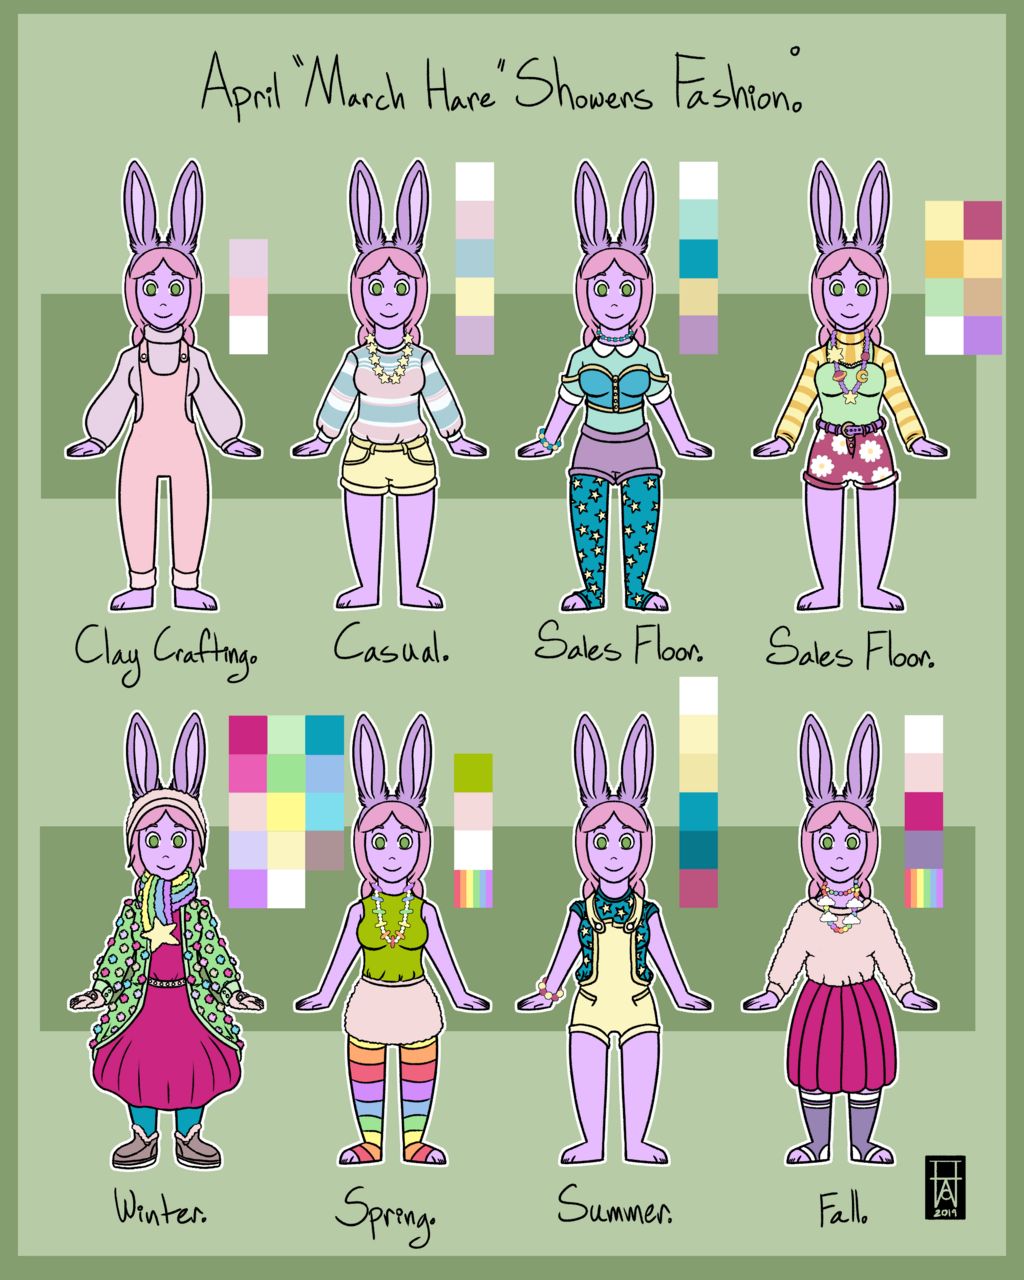 April "March Hare" Showers - Fashion: